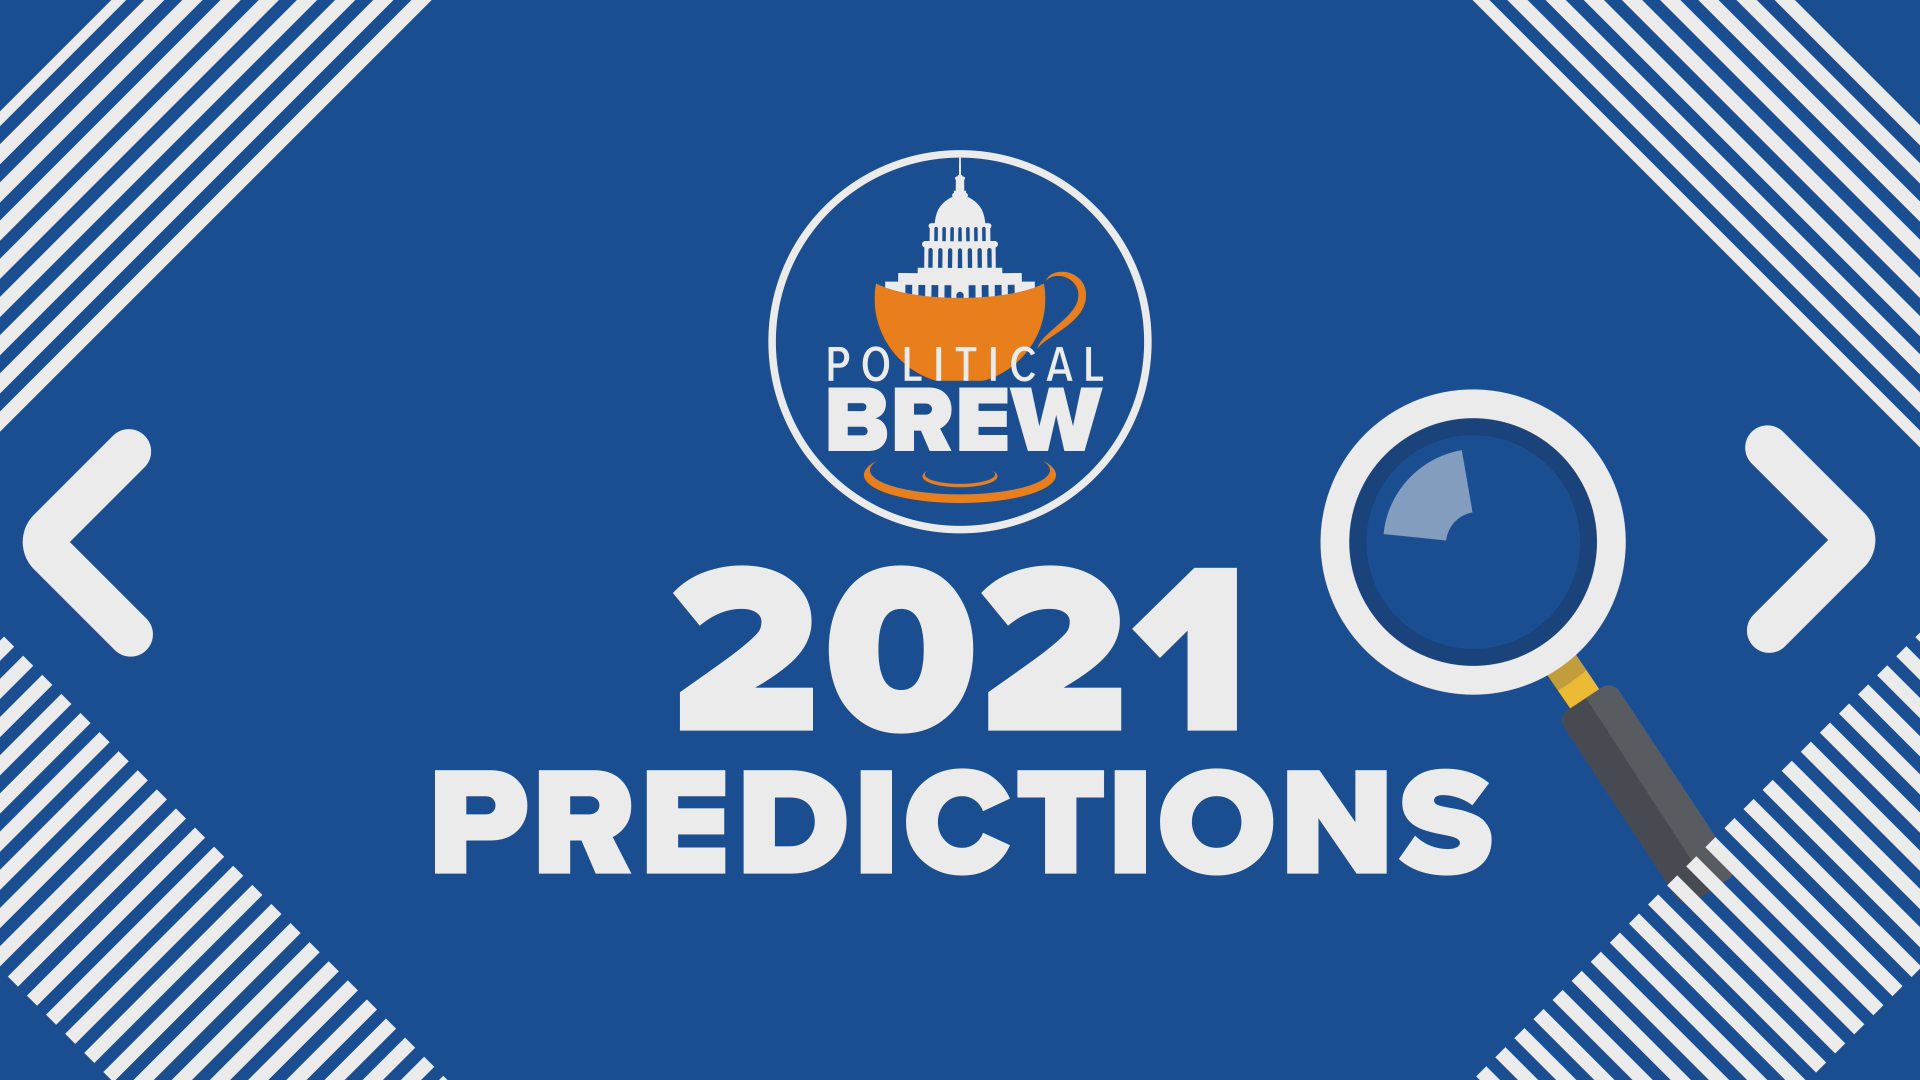 All five of our Political Brew analysts come together one more time to offer their predictions for the new year in politics.